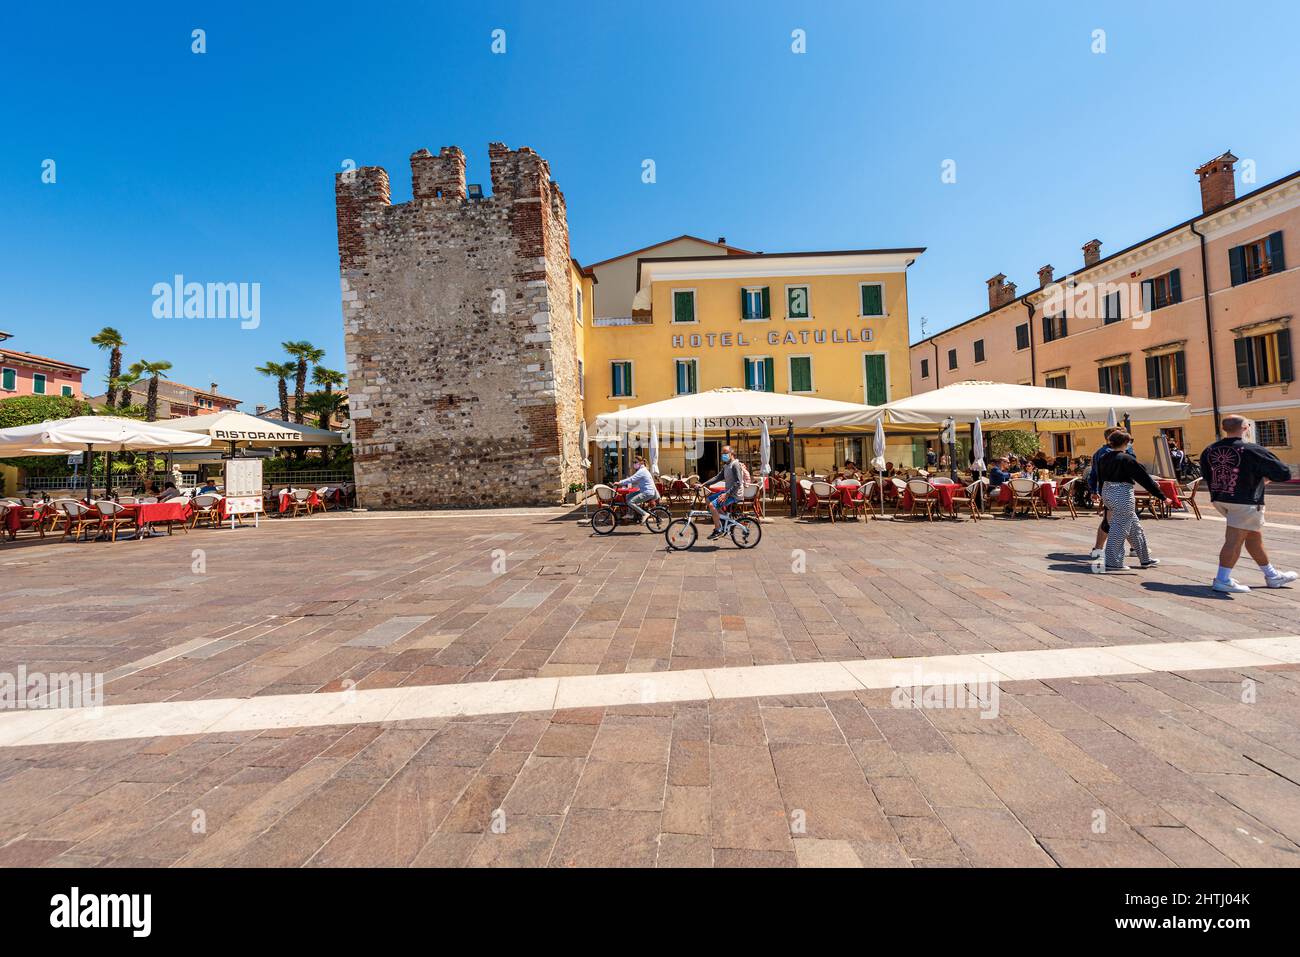 Downtown of Bardolino village. Promenade on the coast of Lake Garda with the medieval tower and restaurants, pizzerias and bars. Verona, Italy. Stock Photo